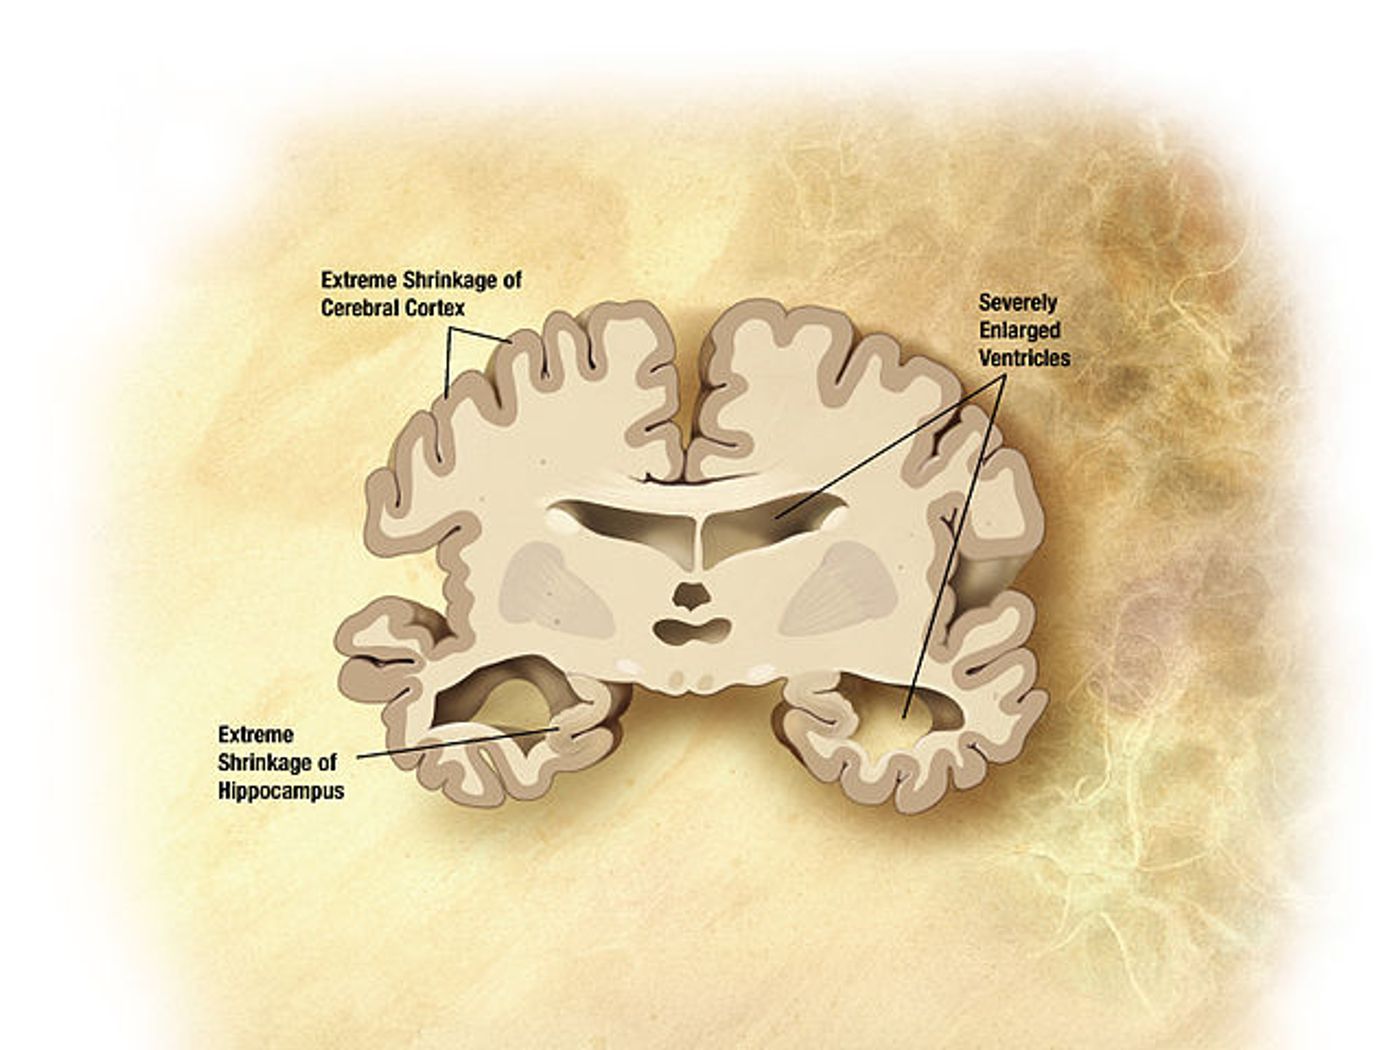 Areas of the brain impacted by Alzheimer's Disease